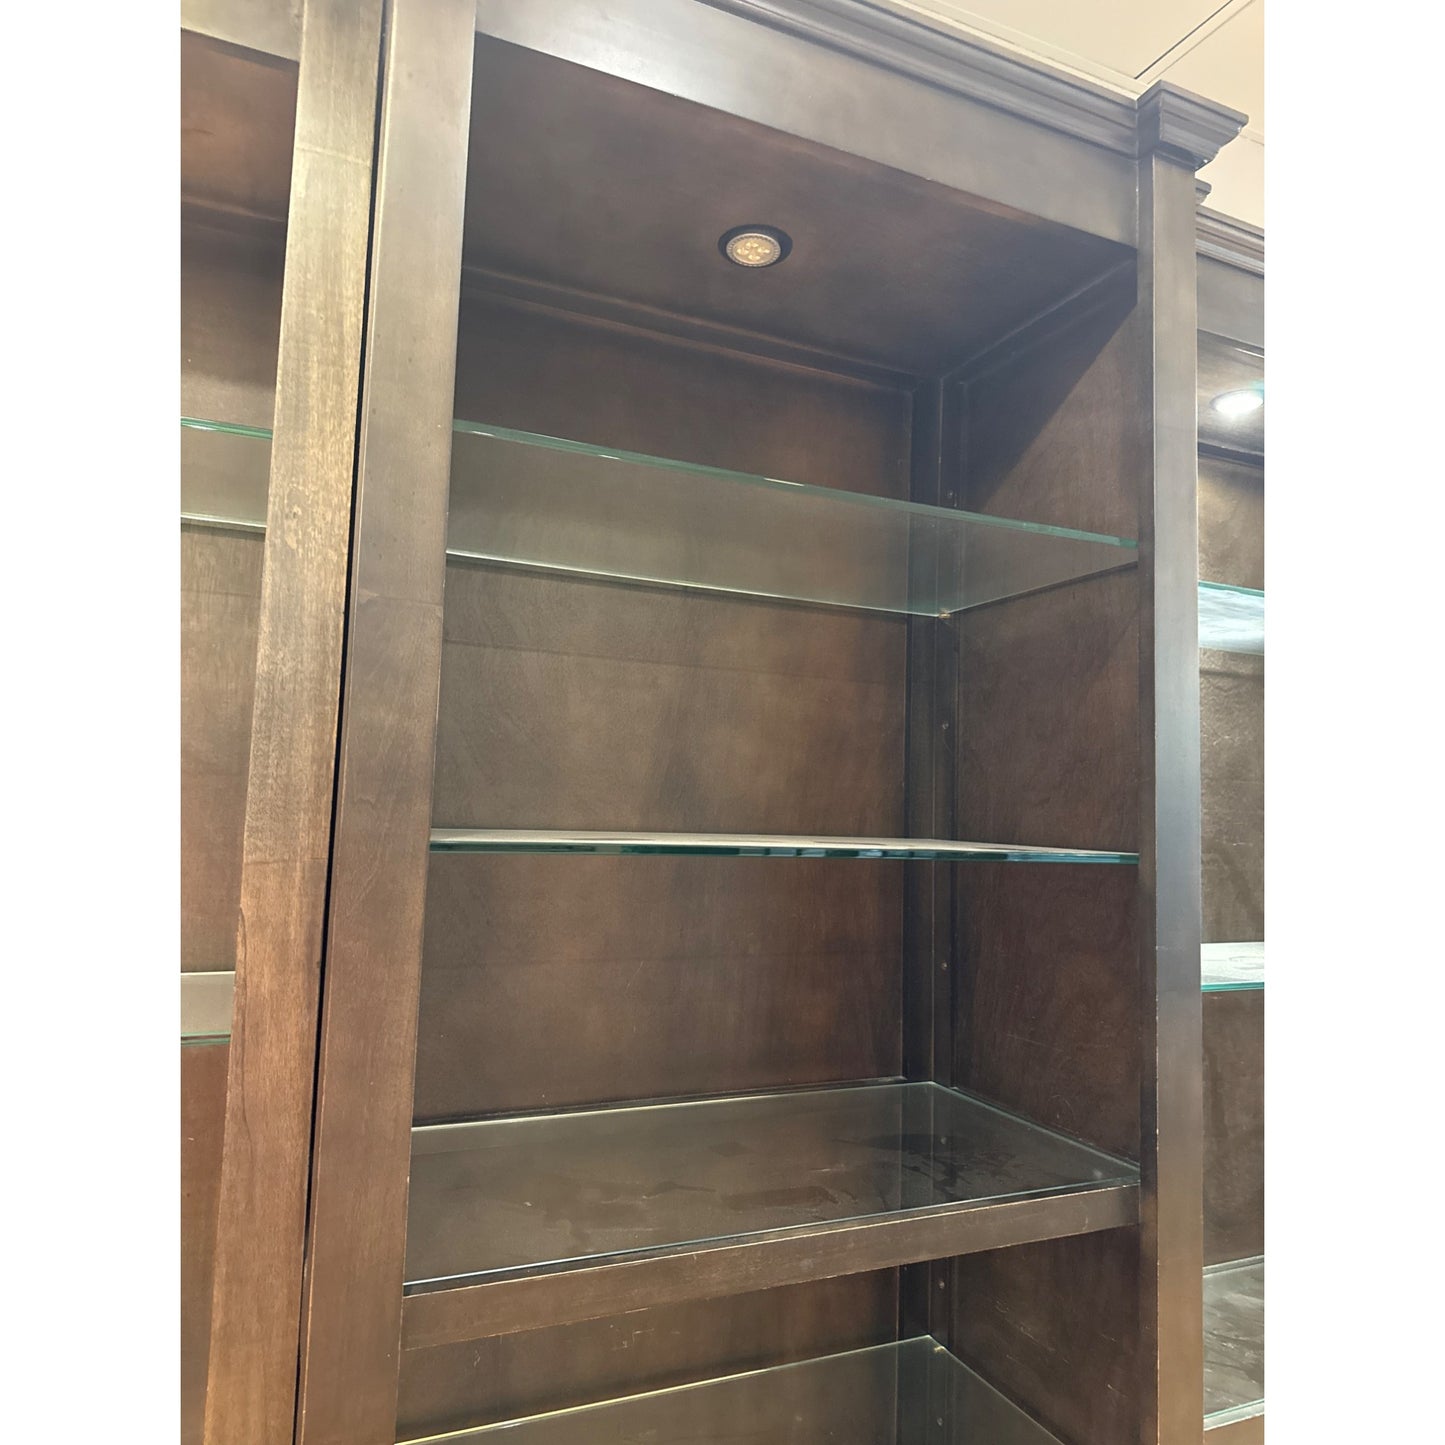 Wood Commercial Shelving Unit with Lighting